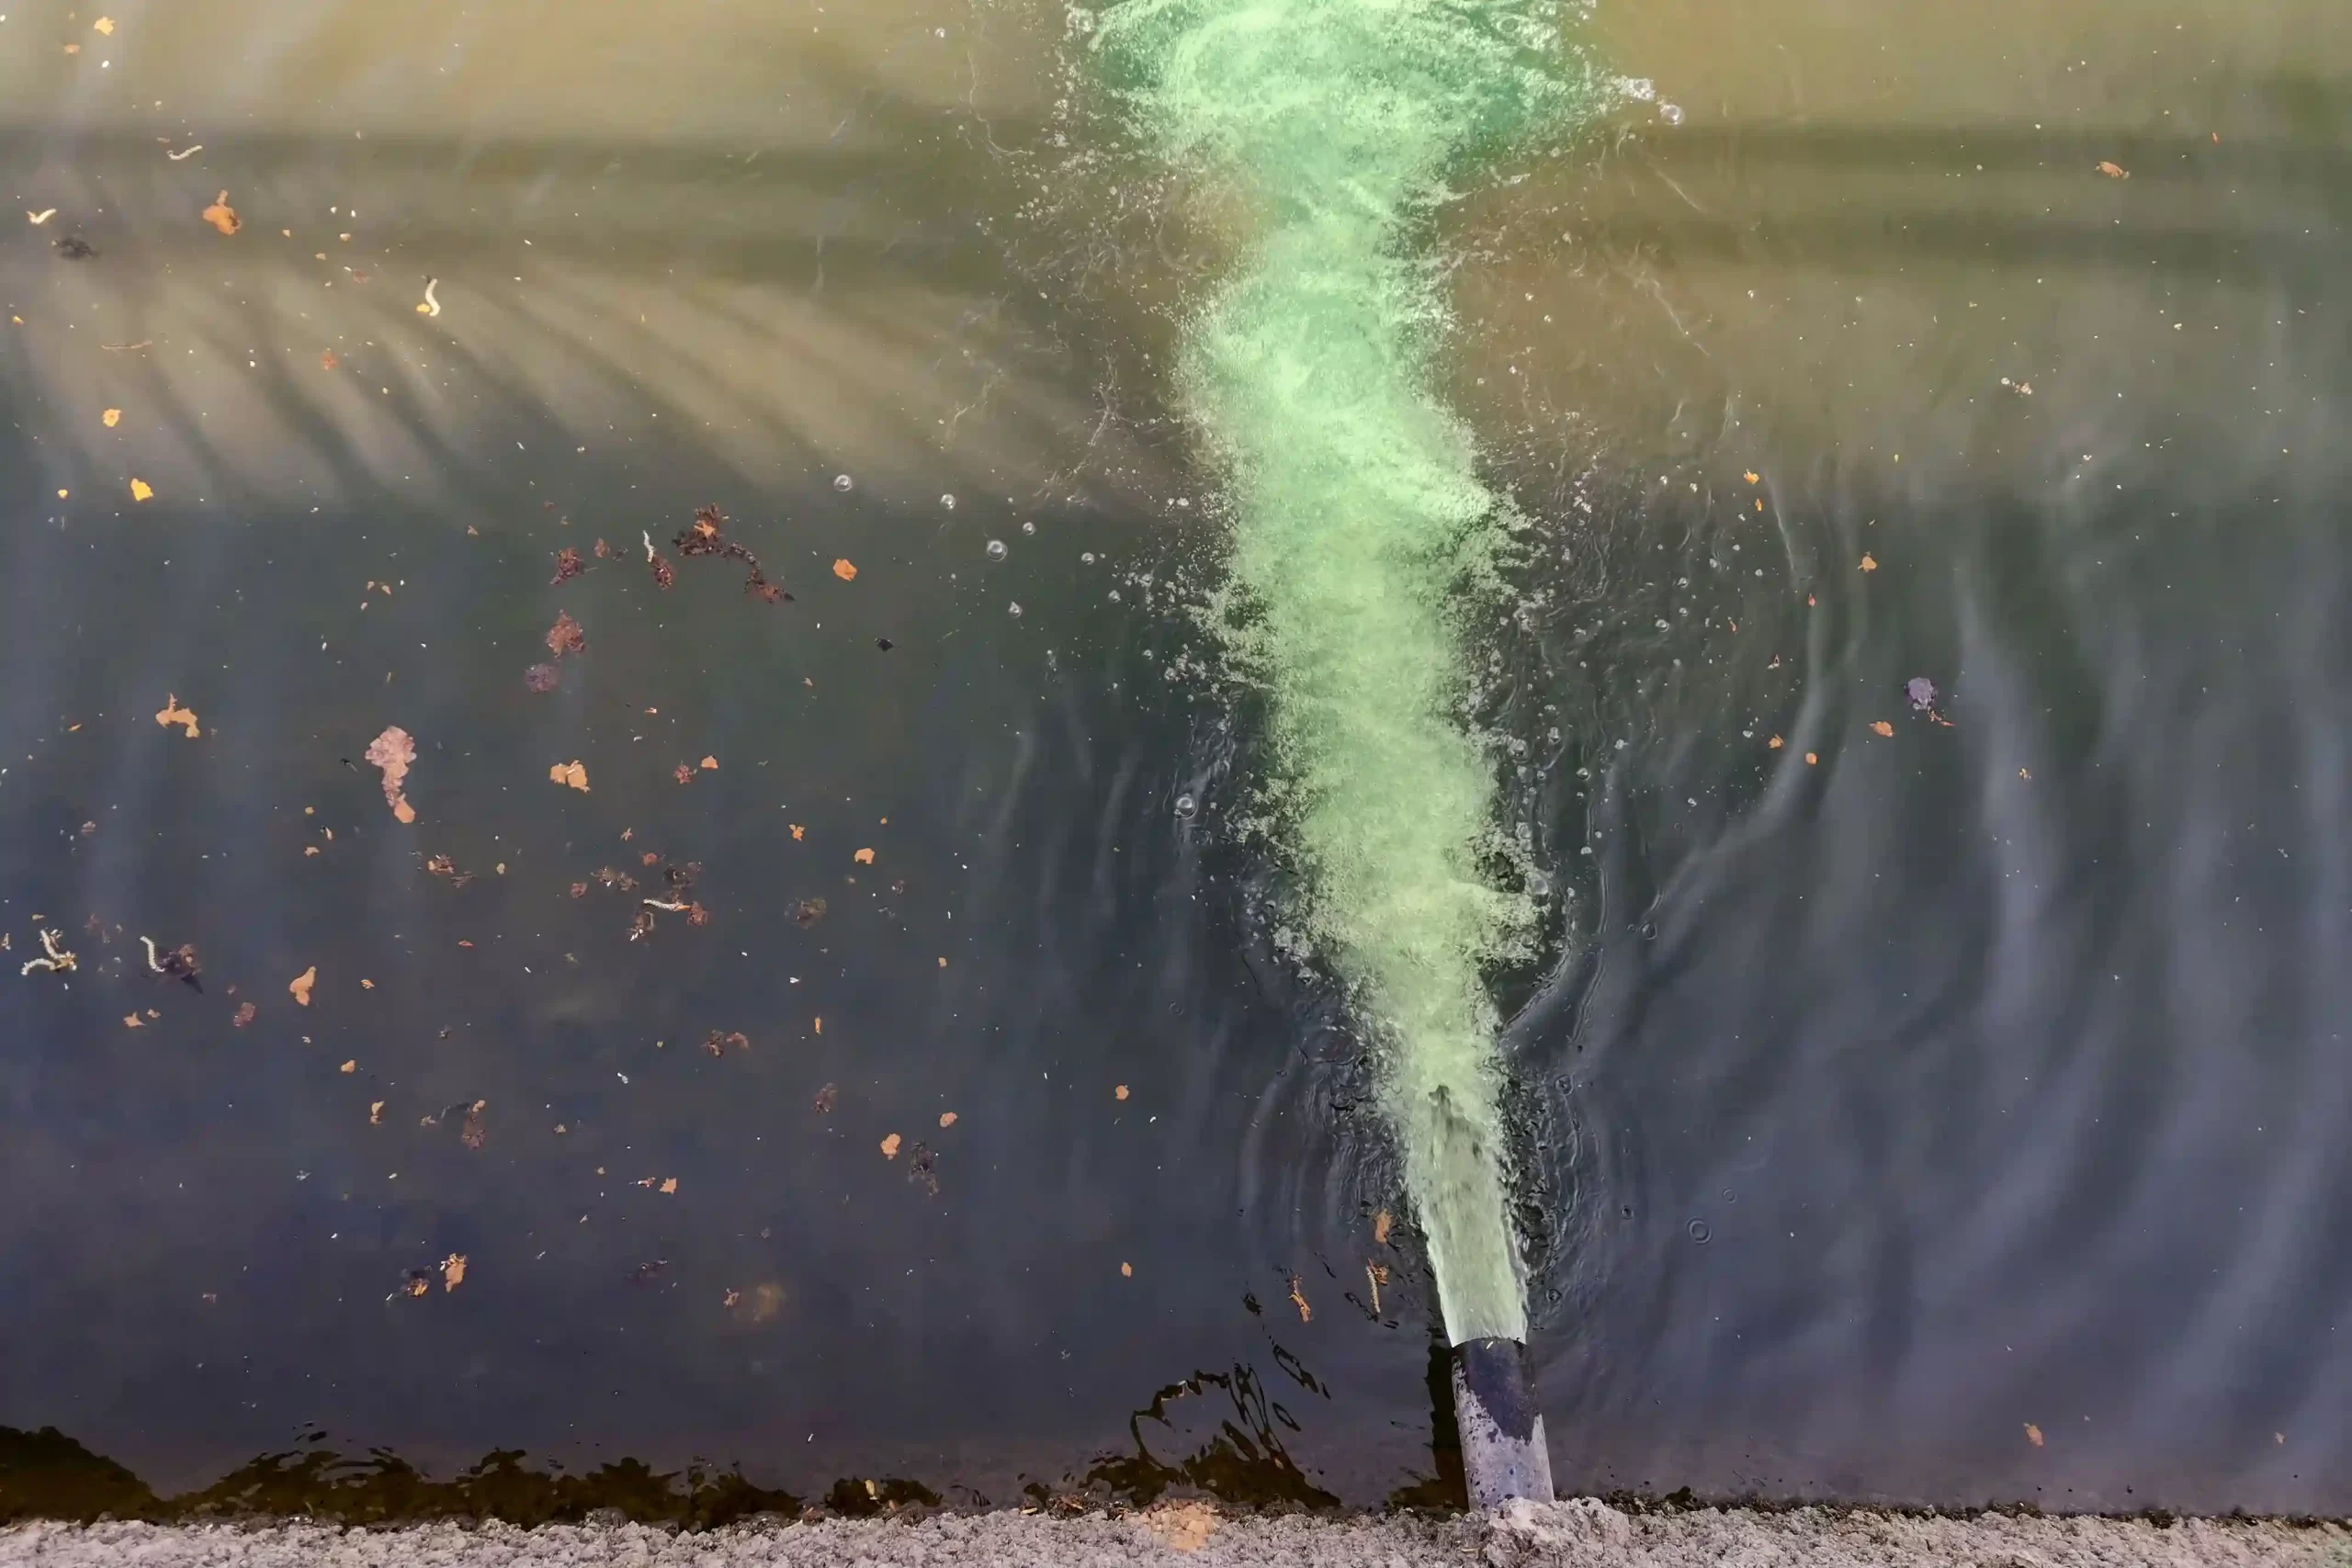 Green, polluted water being pumped into a river.